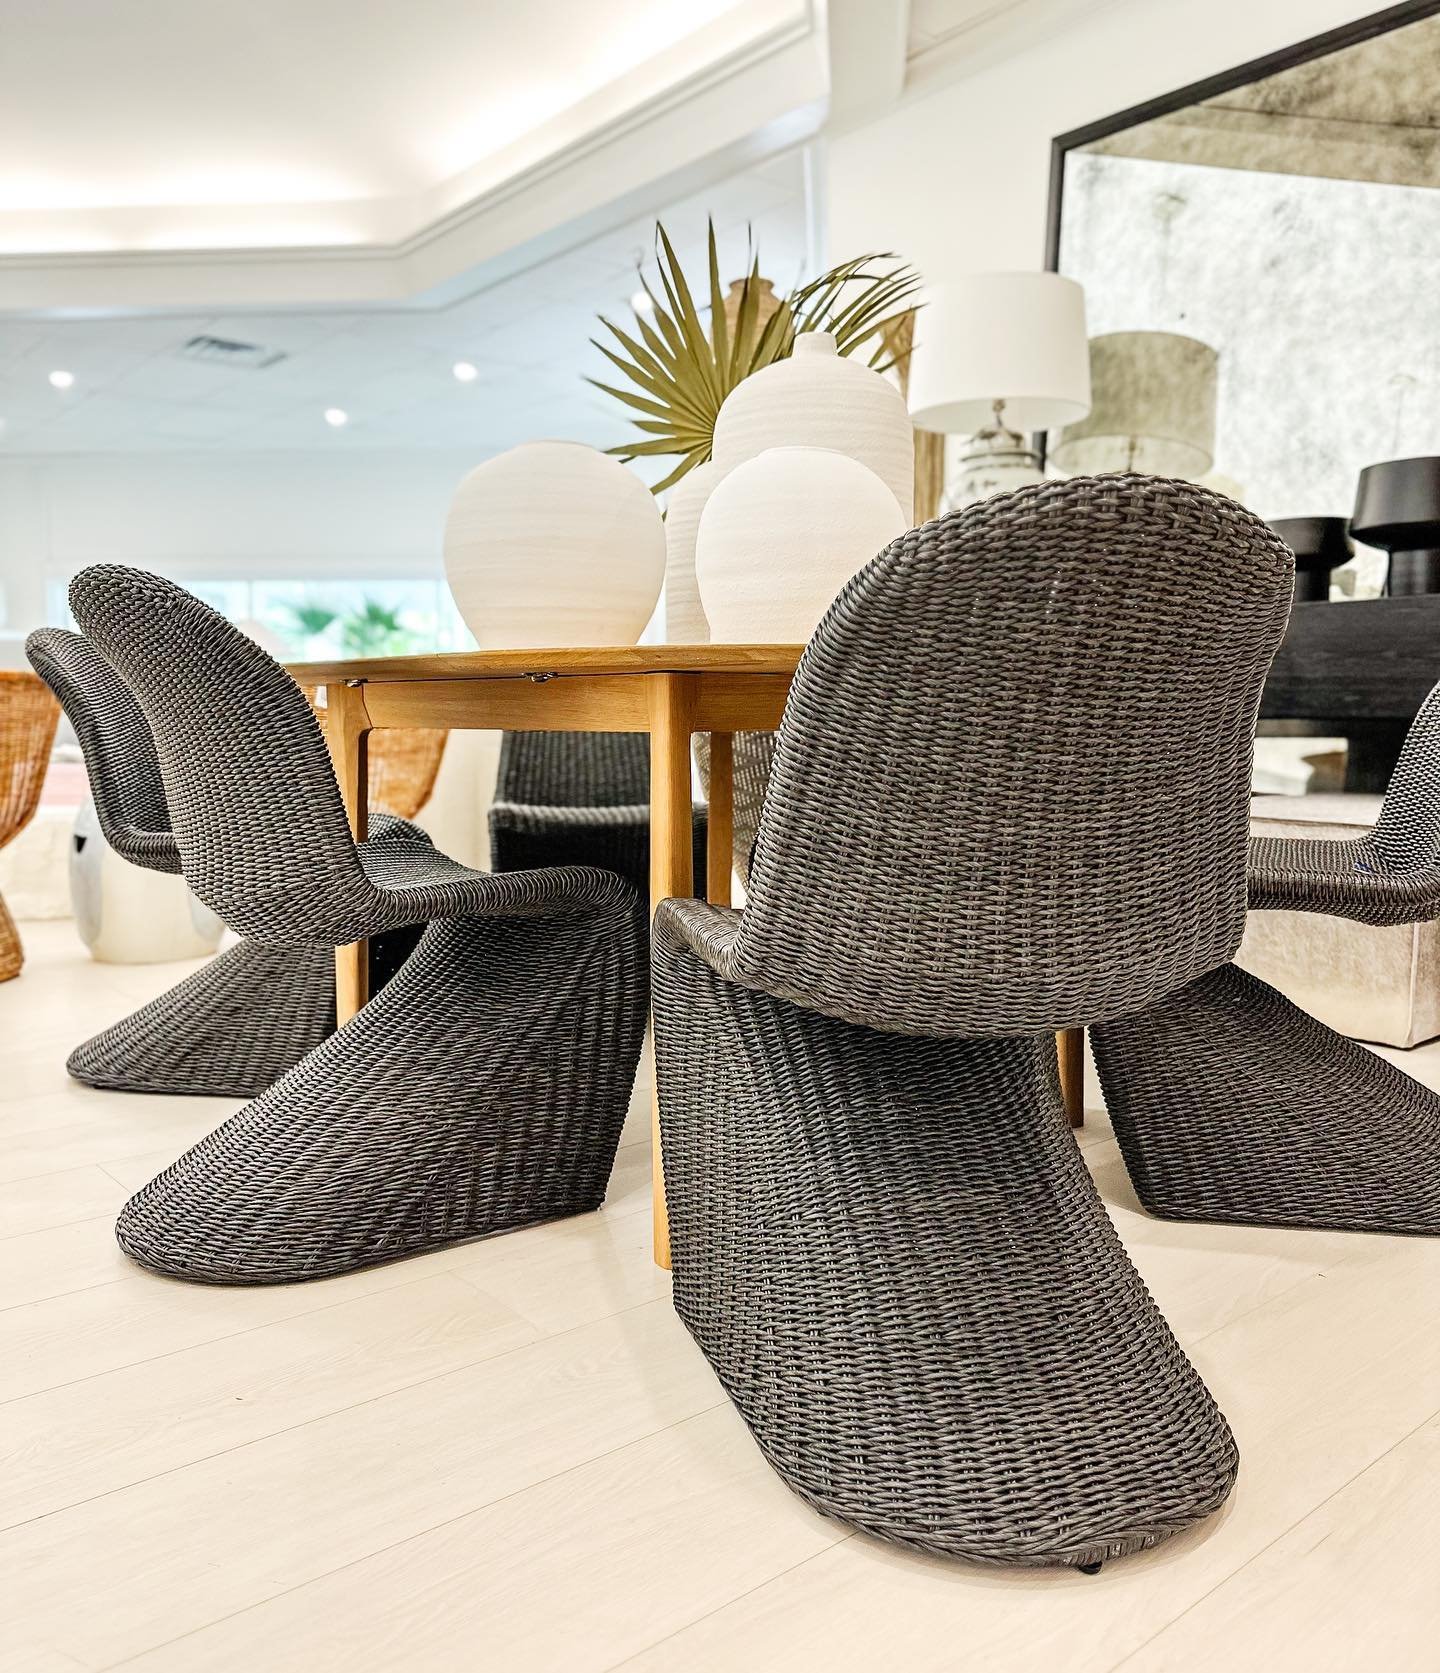 Suitable for indoor and outdoor use, these curved back chairs are showstoppers. 6 available in black at the store or in other finishes to order 
.
.
.
#HazelHouseVero #ShopHazelHouse #VeroBeach #32963 #VeroBeachInteriorDesign  #ShopLocal #HomeDecor #